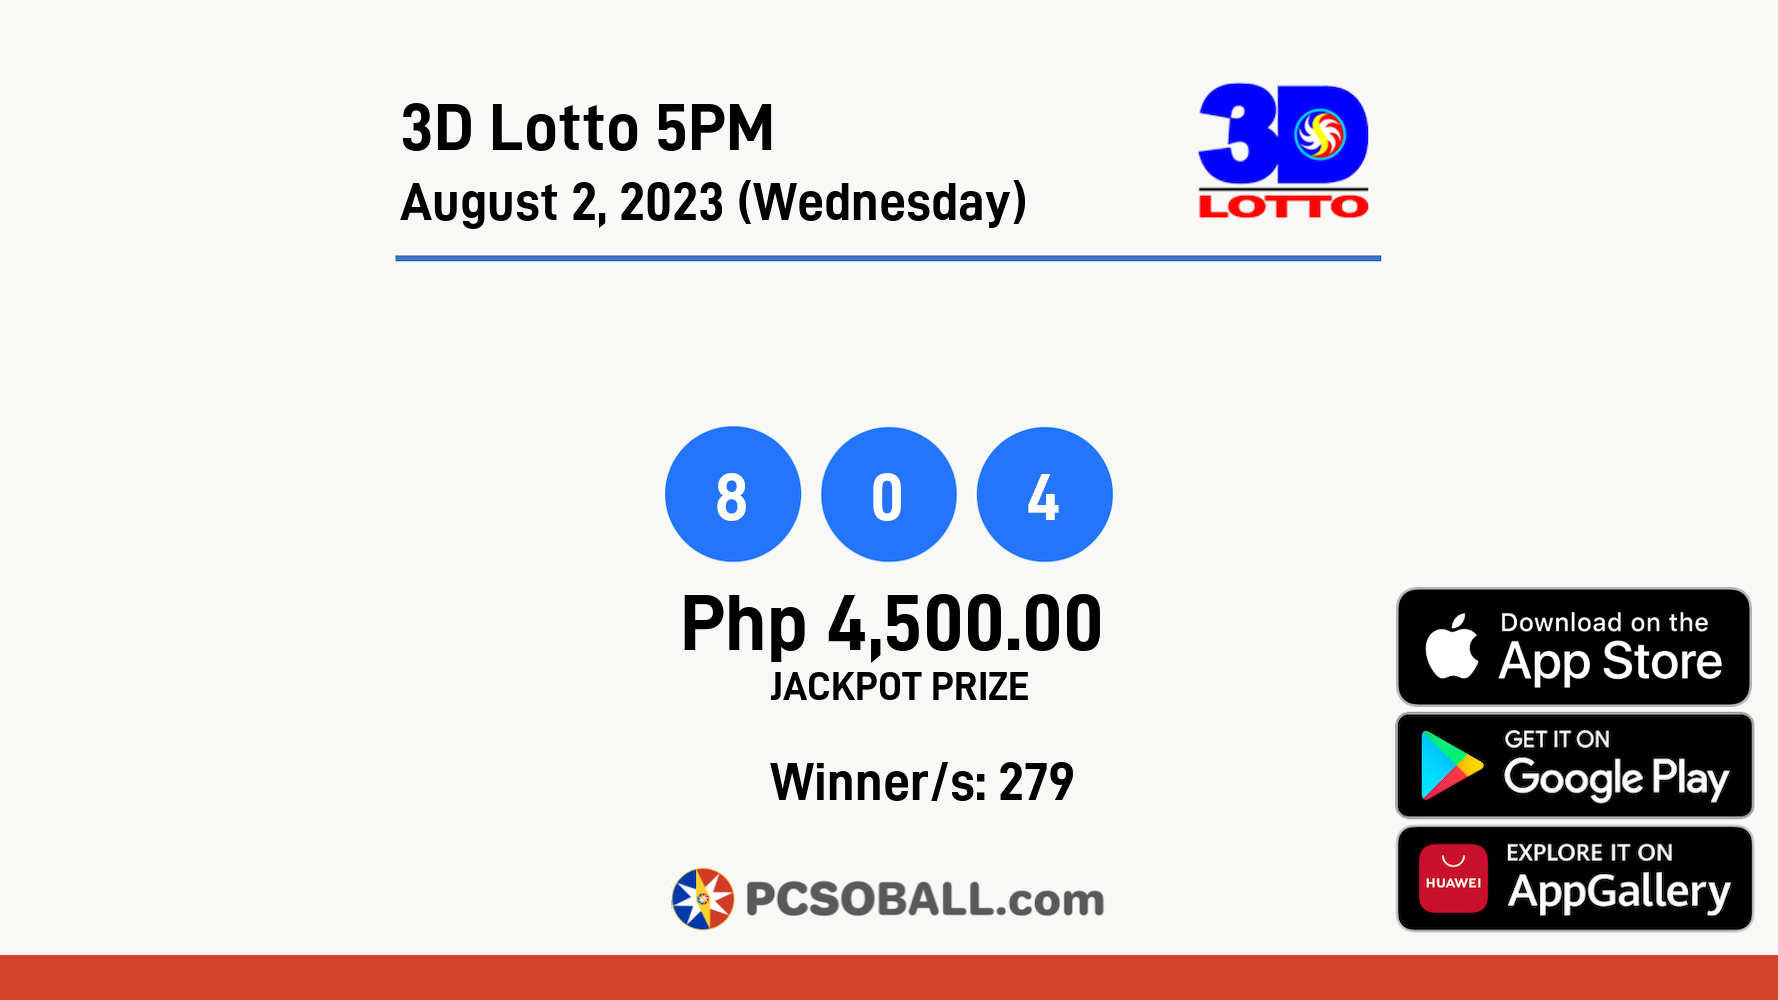 3D Lotto 5PM August 2, 2023 (Wednesday) Result